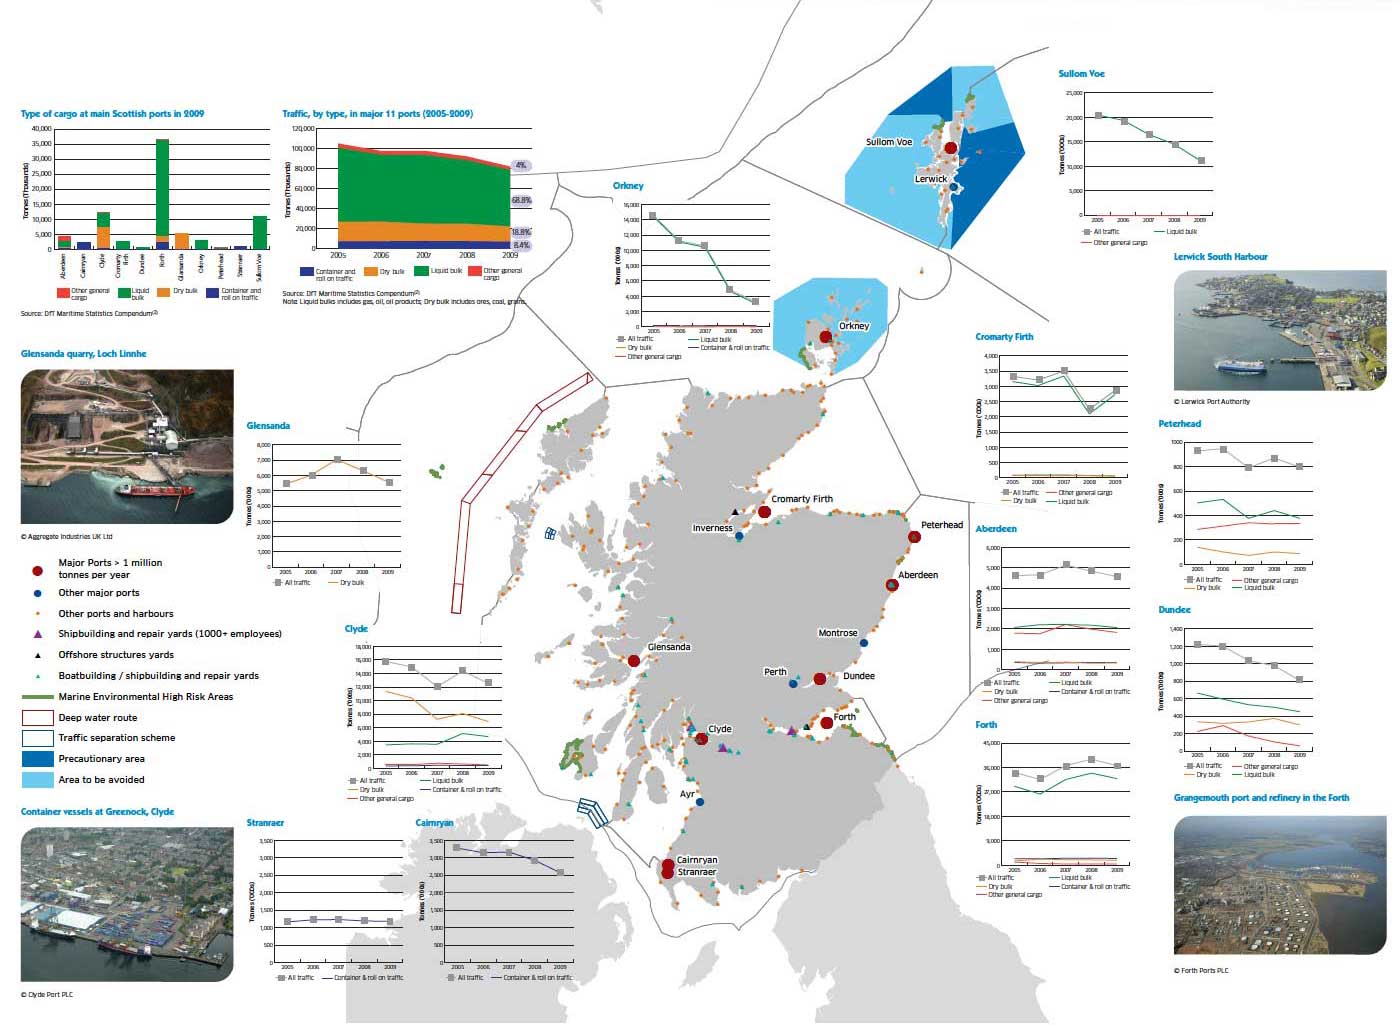 Scotland's ports, cargo tonnages (2005-2009) and identified navigation areas